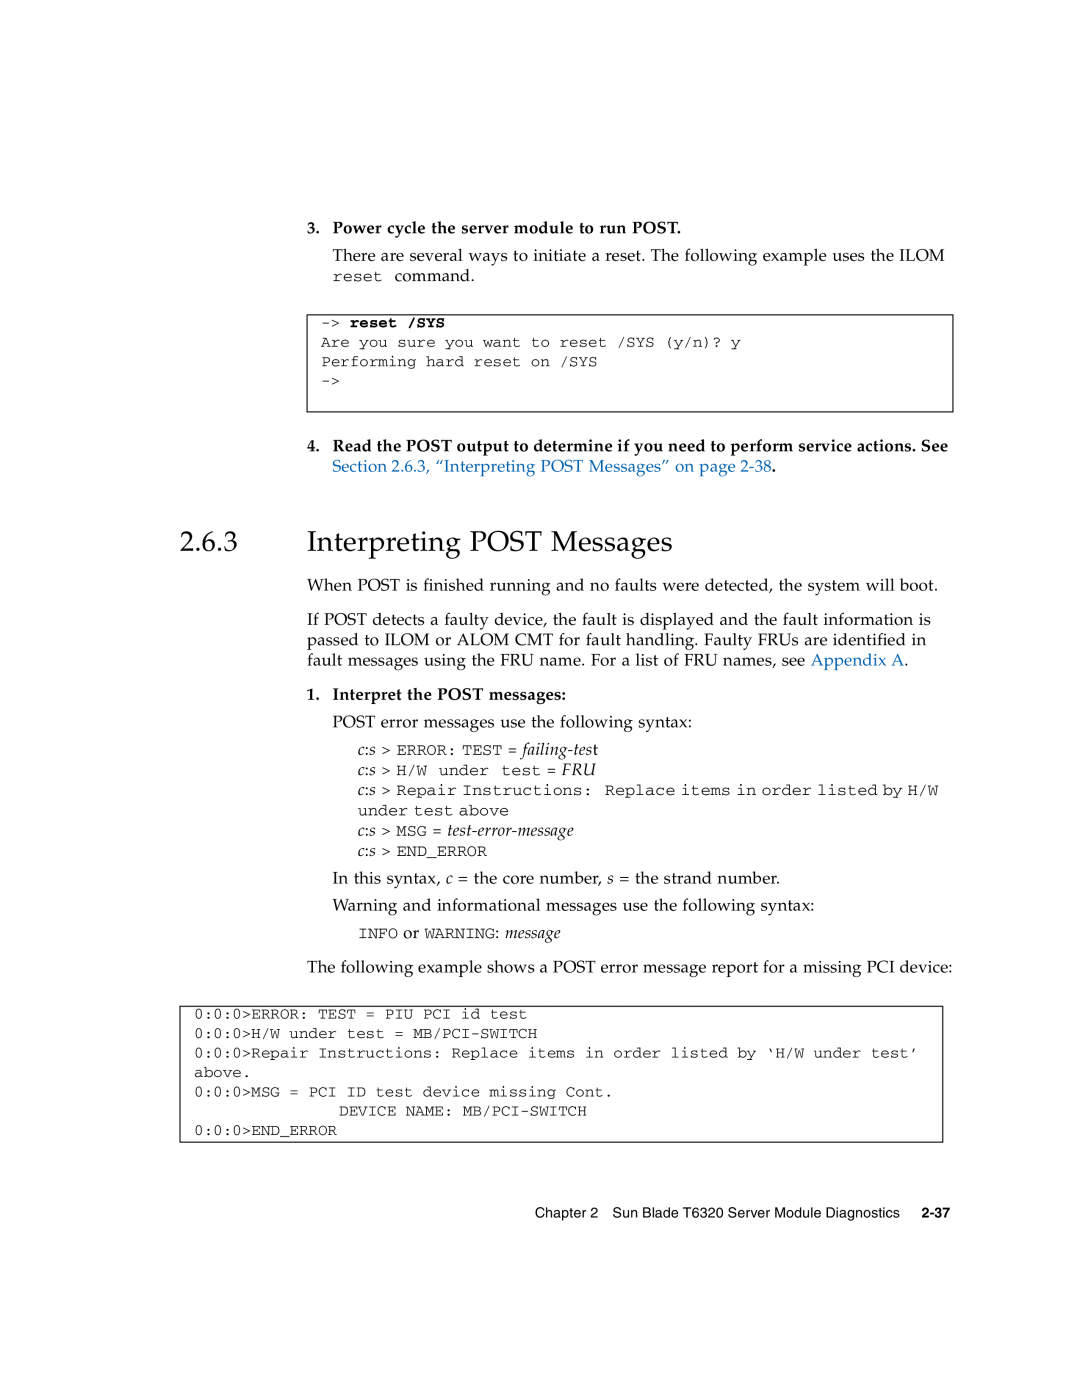 Sun Microsystems T6320 Interpreting POST Messages, Power cycle the server module to run POST, Interpret the POST messages 